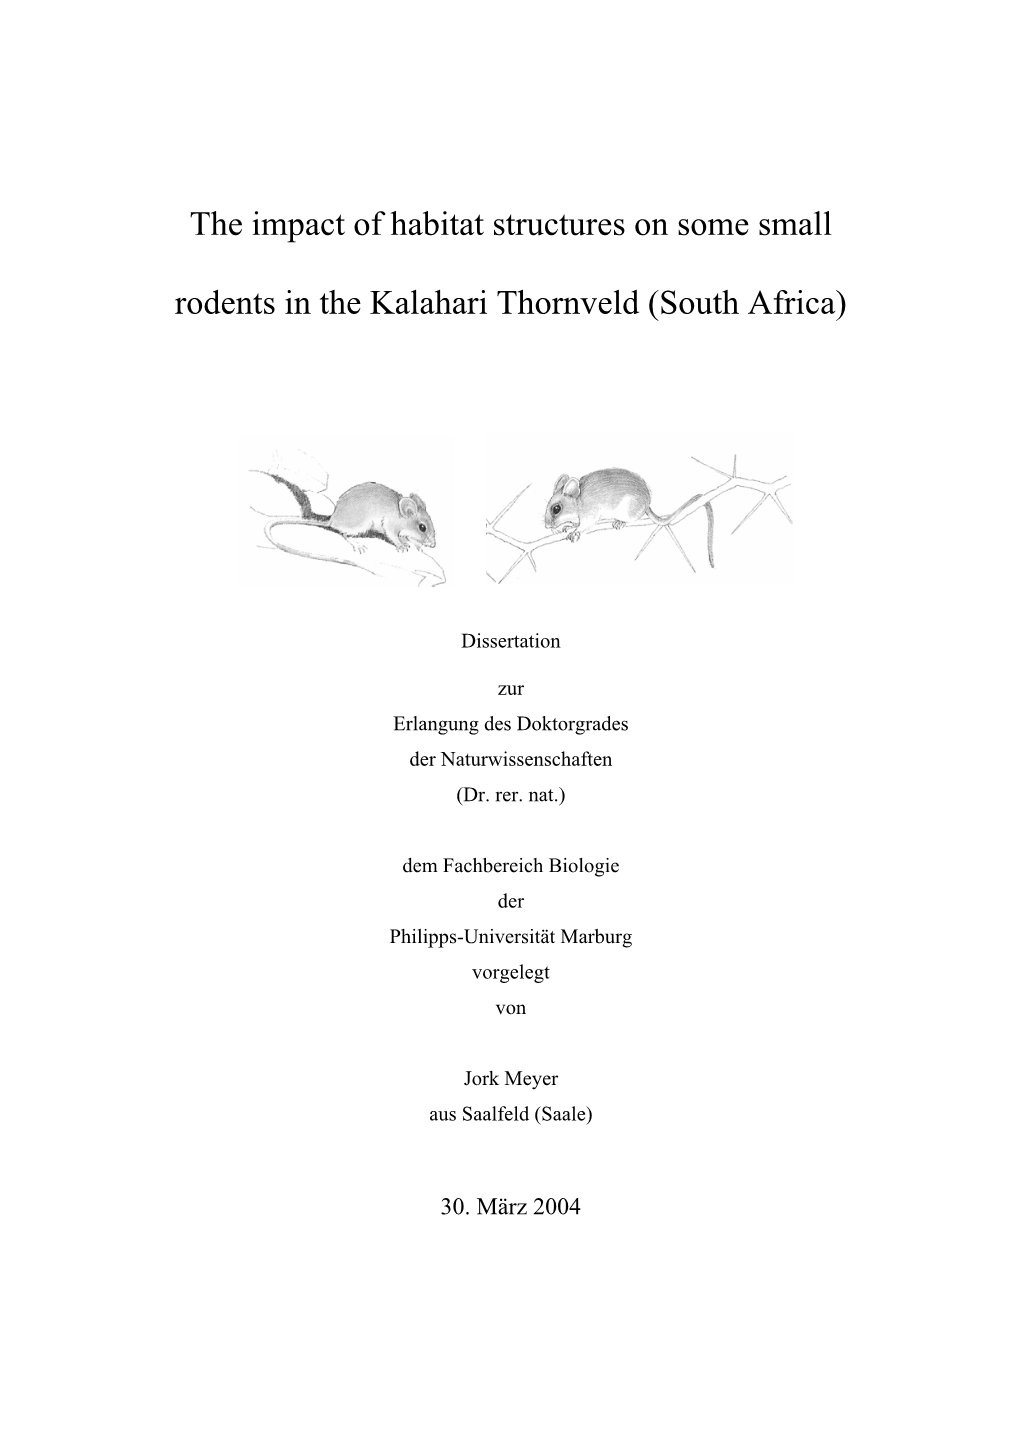 The Impact of Habitat Structures on Some Small Rodents in the Kalahari Thornveld (South Africa)